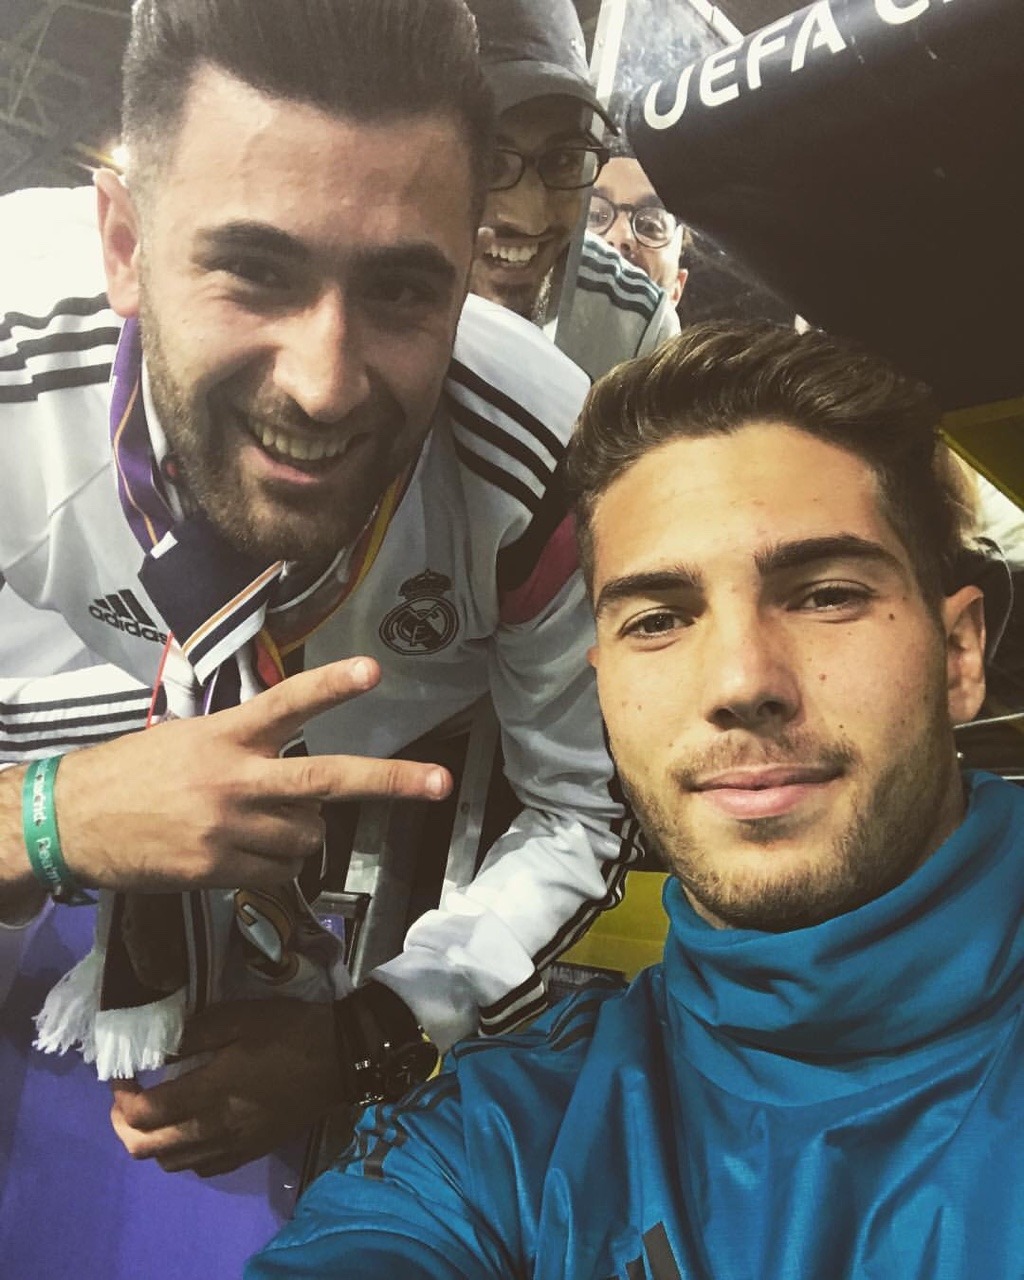 THE ZIDANE ARCHIVES - Luca with a fan, at Signal Iduna Park last night.